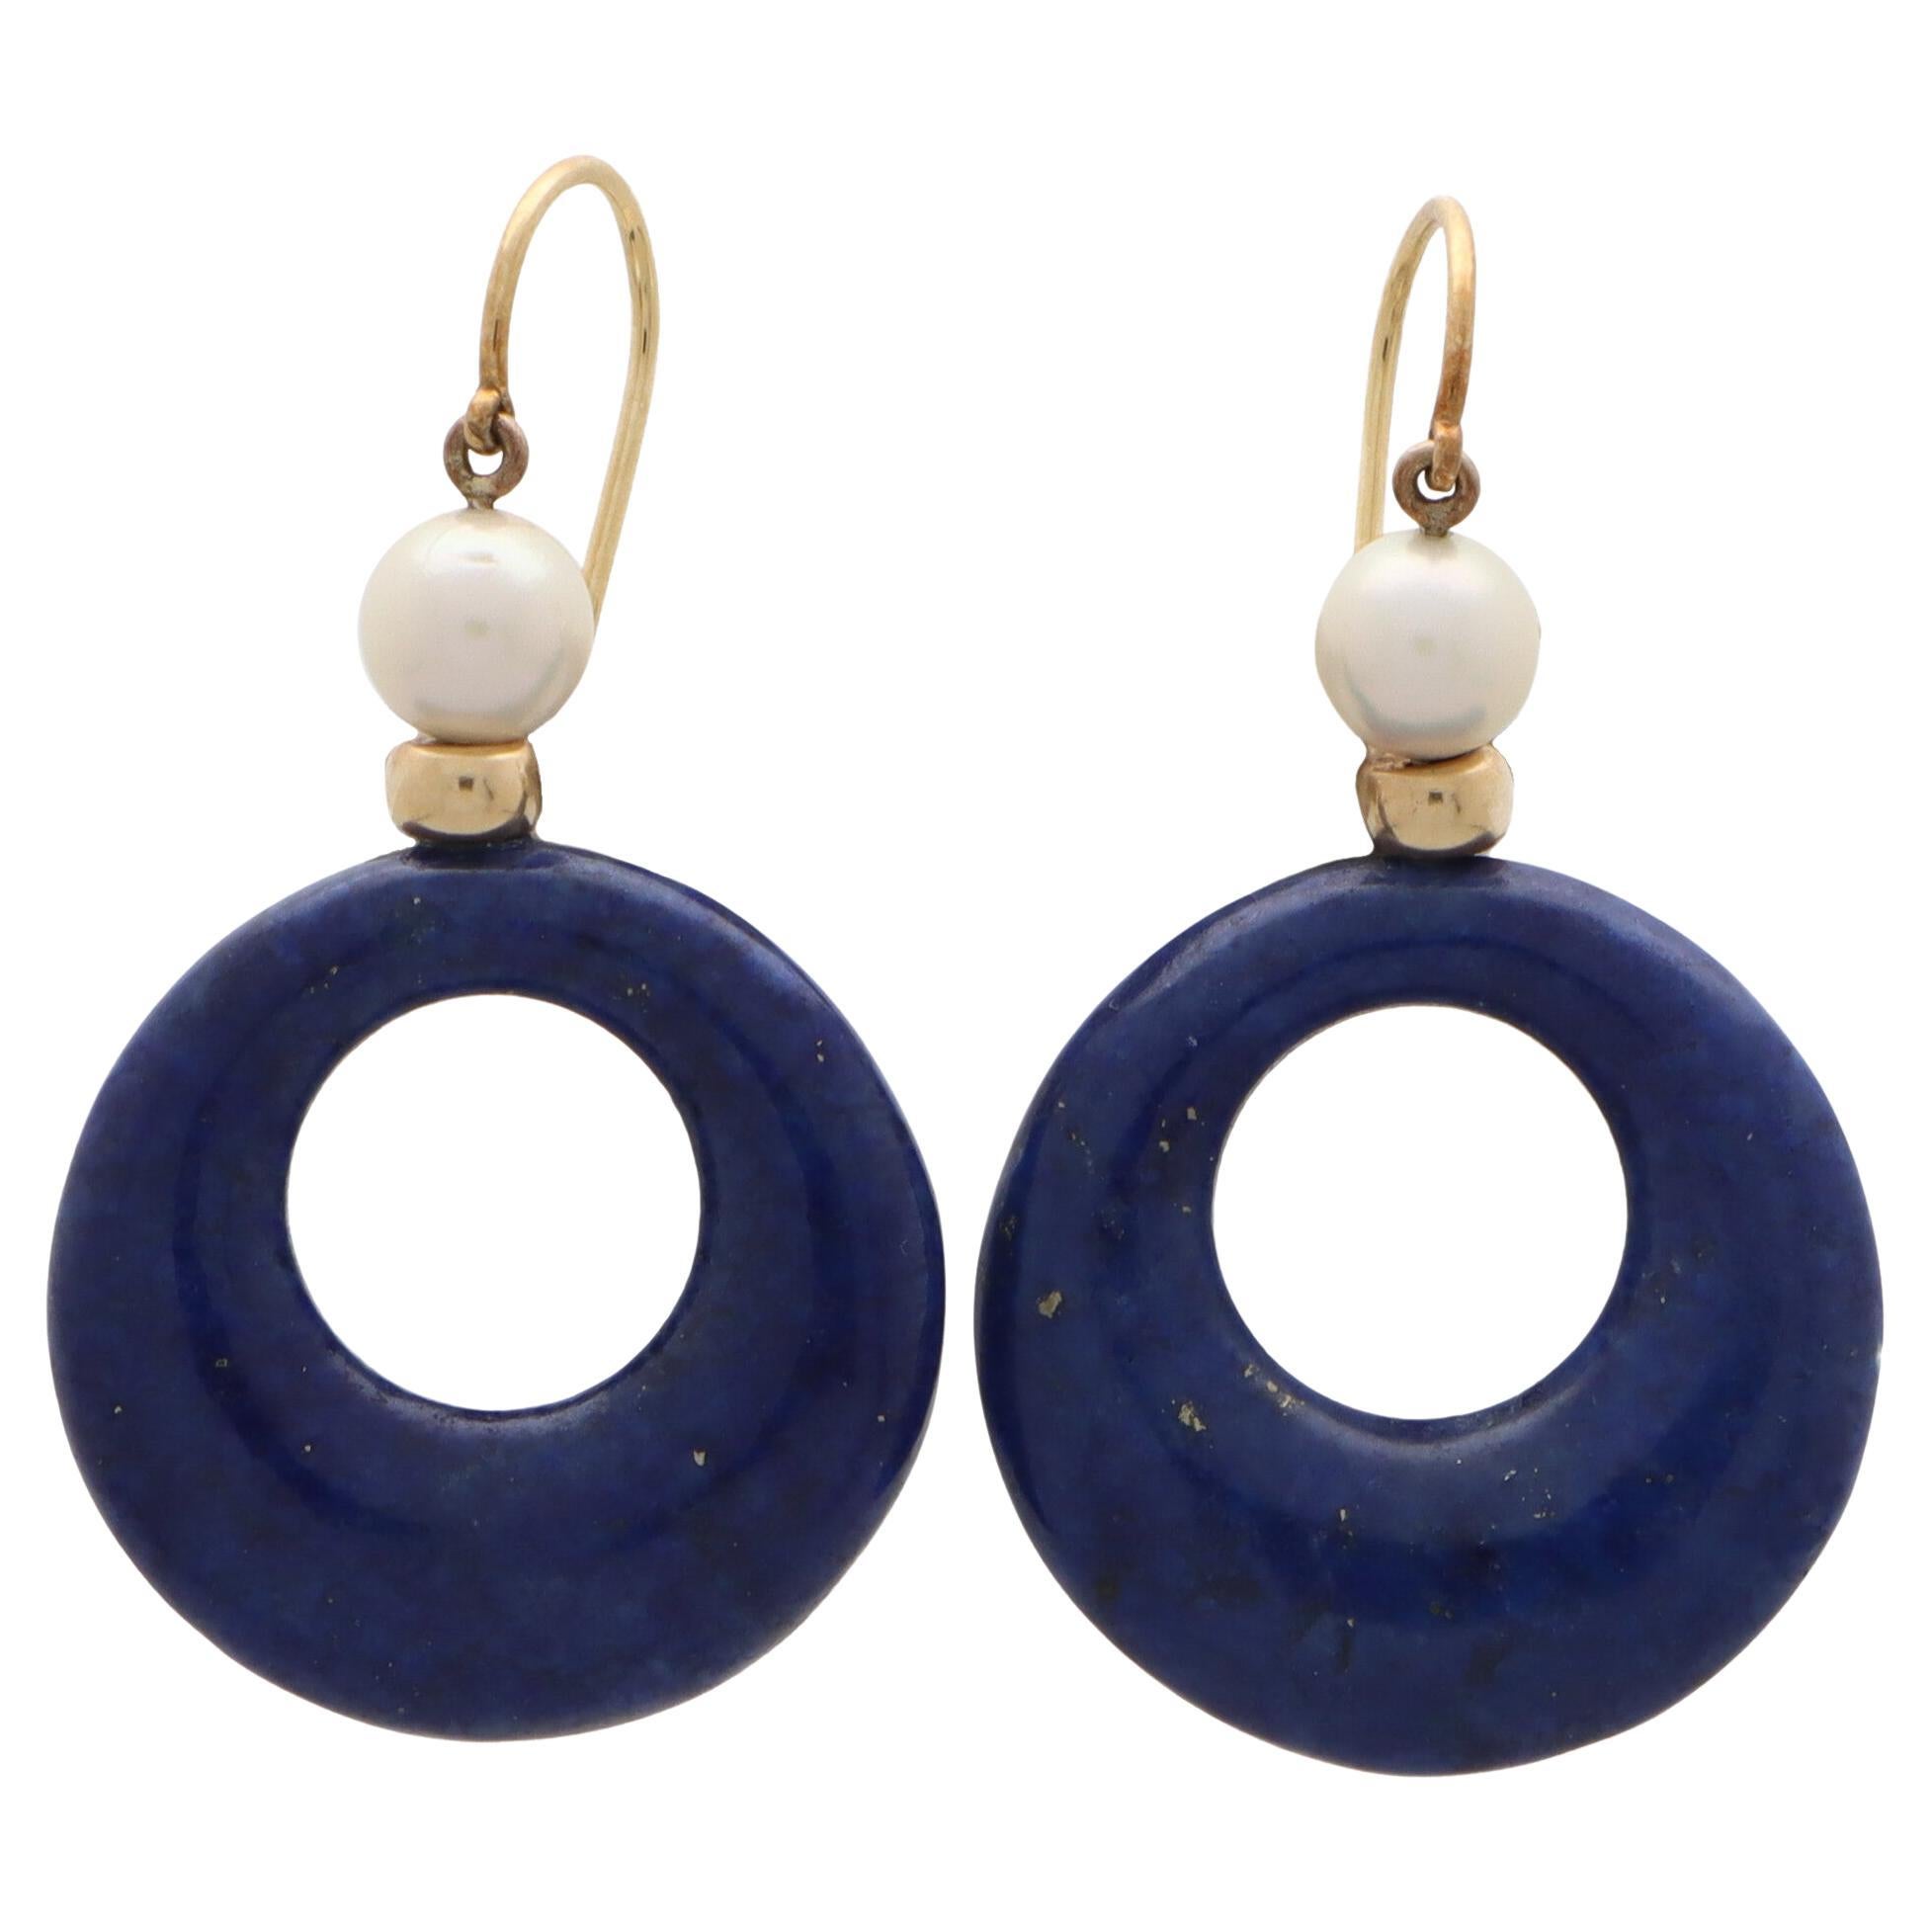 Vintage Pearl and Lapis Lazuli Drop Earrings Set in 18k Yellow Gold